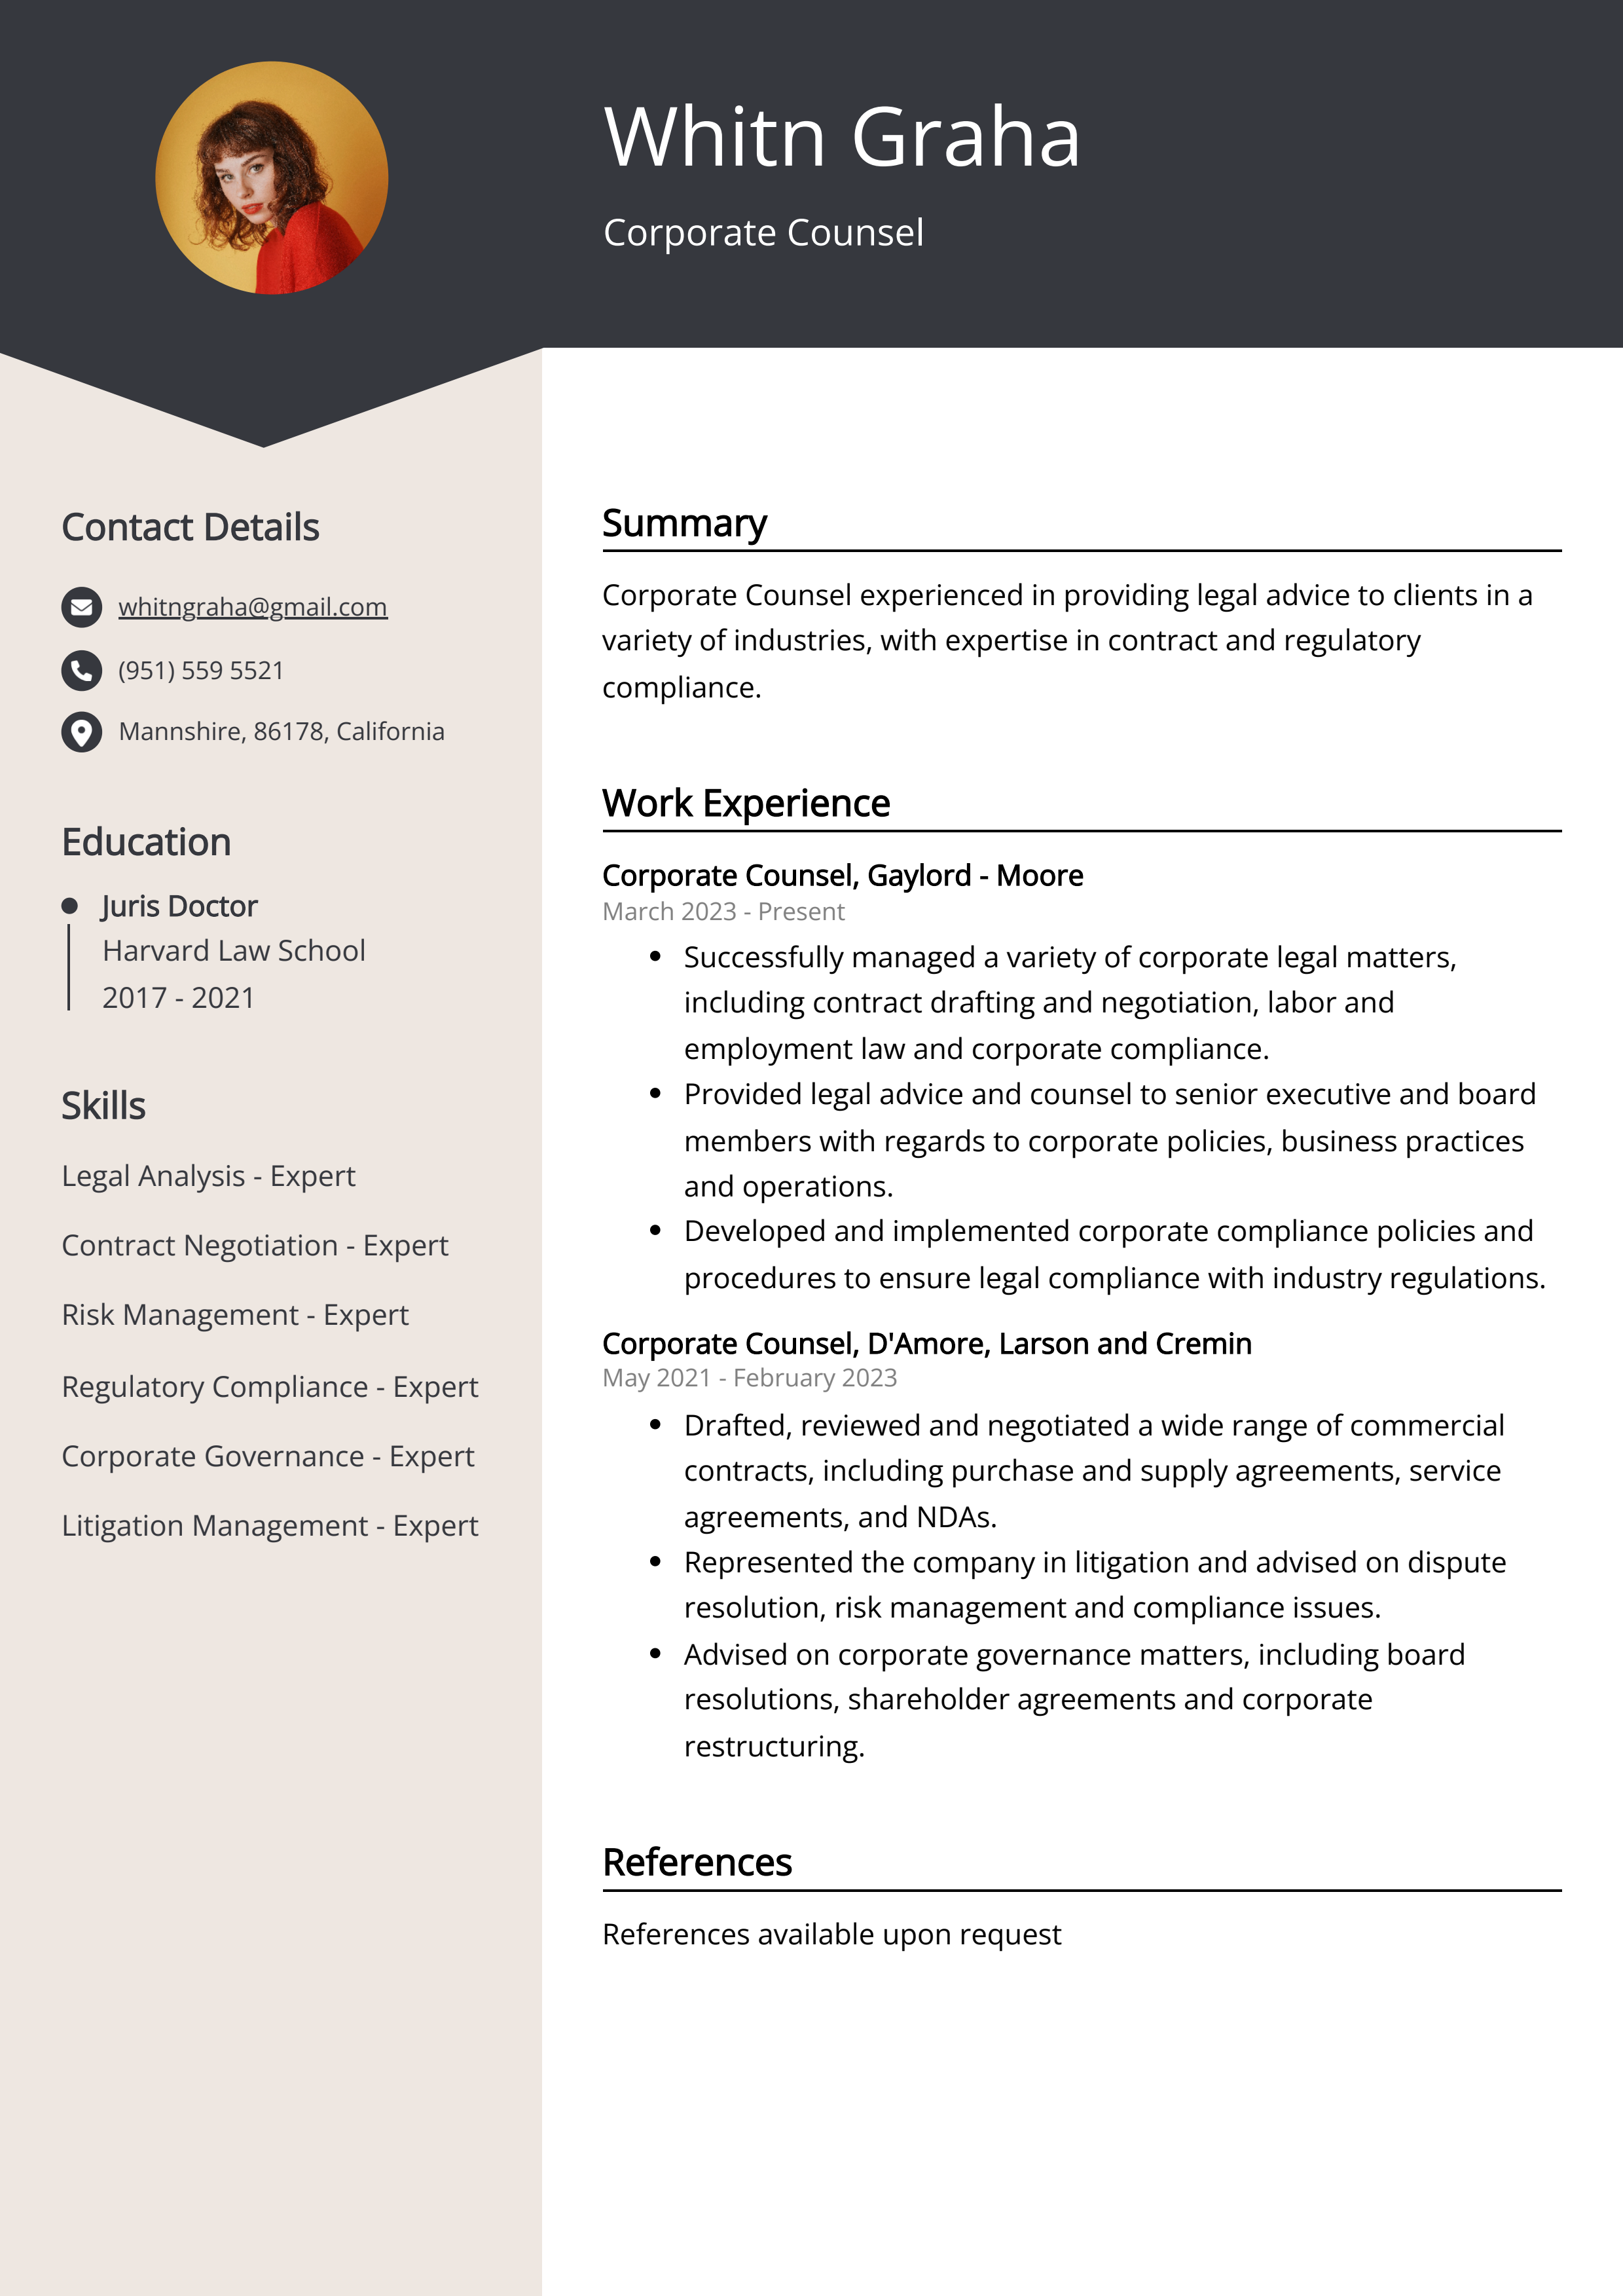 Corporate Counsel CV Example